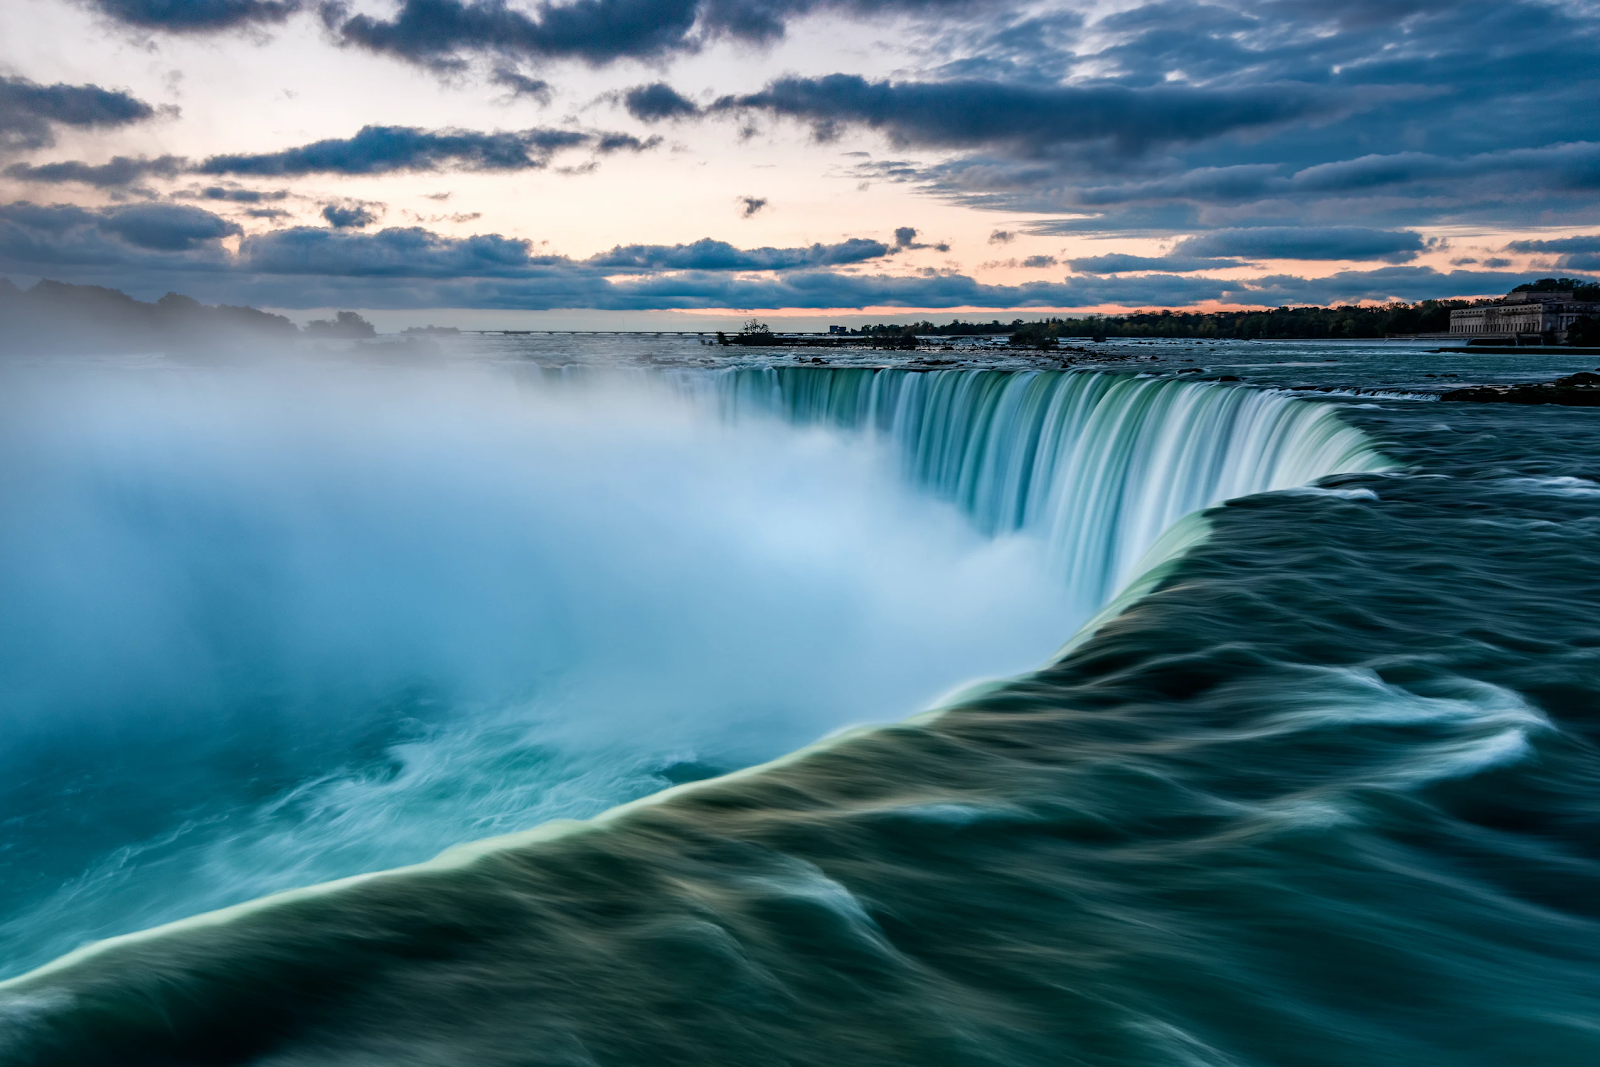 the immense power of water flowing over Niagara, a metaphor for the deluge of traffic Parabol has seen.